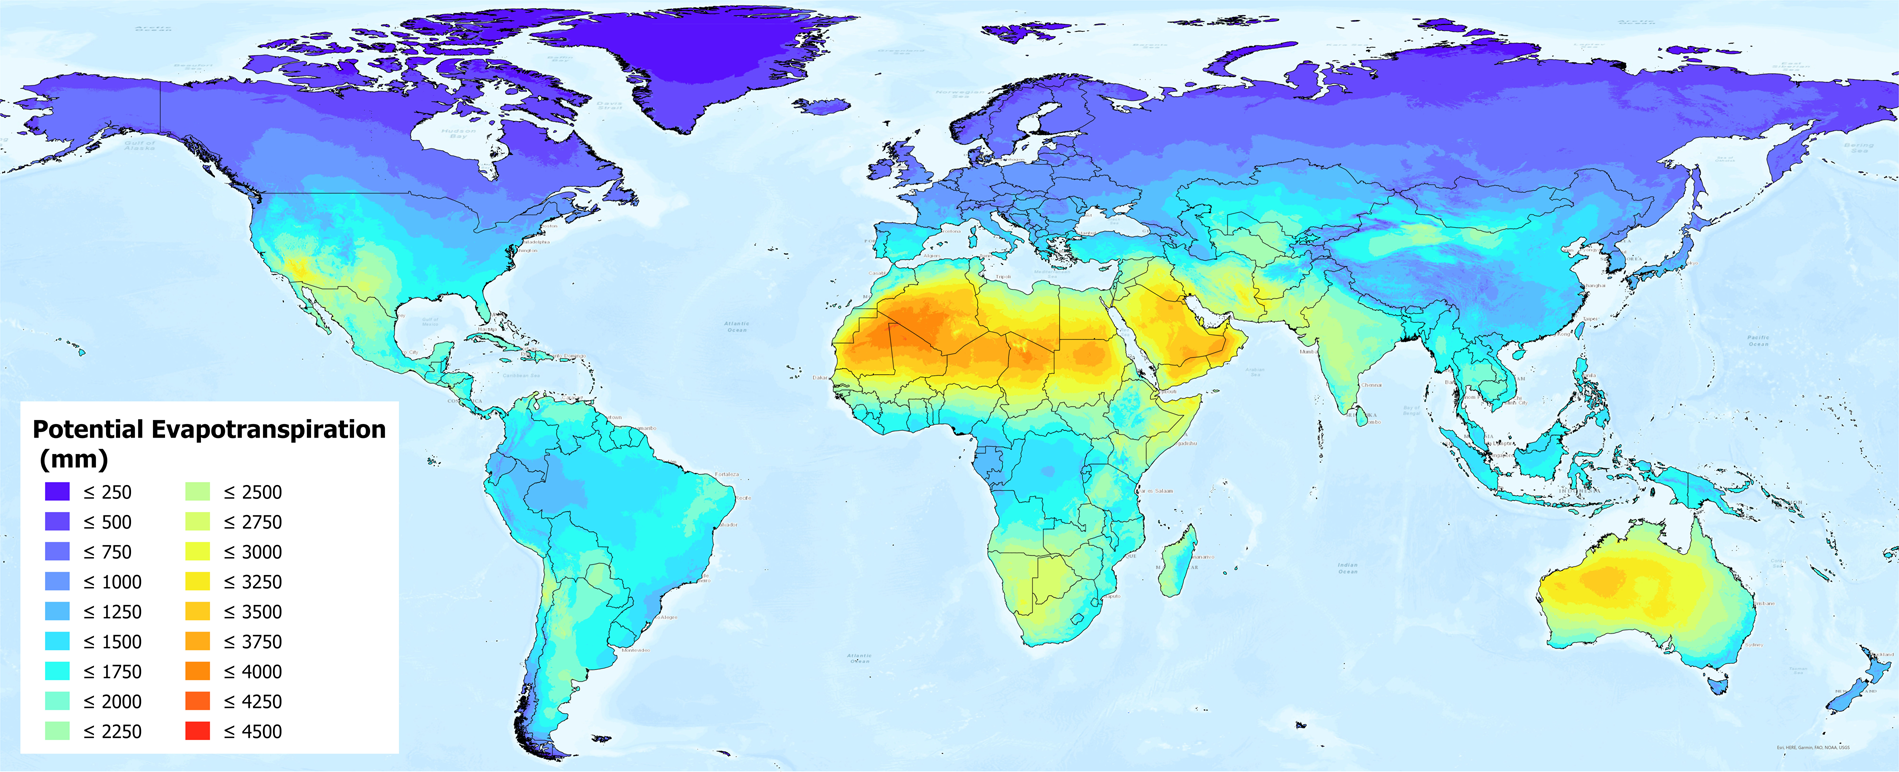 What Are The Different Types Of Plateaus? - WorldAtlas